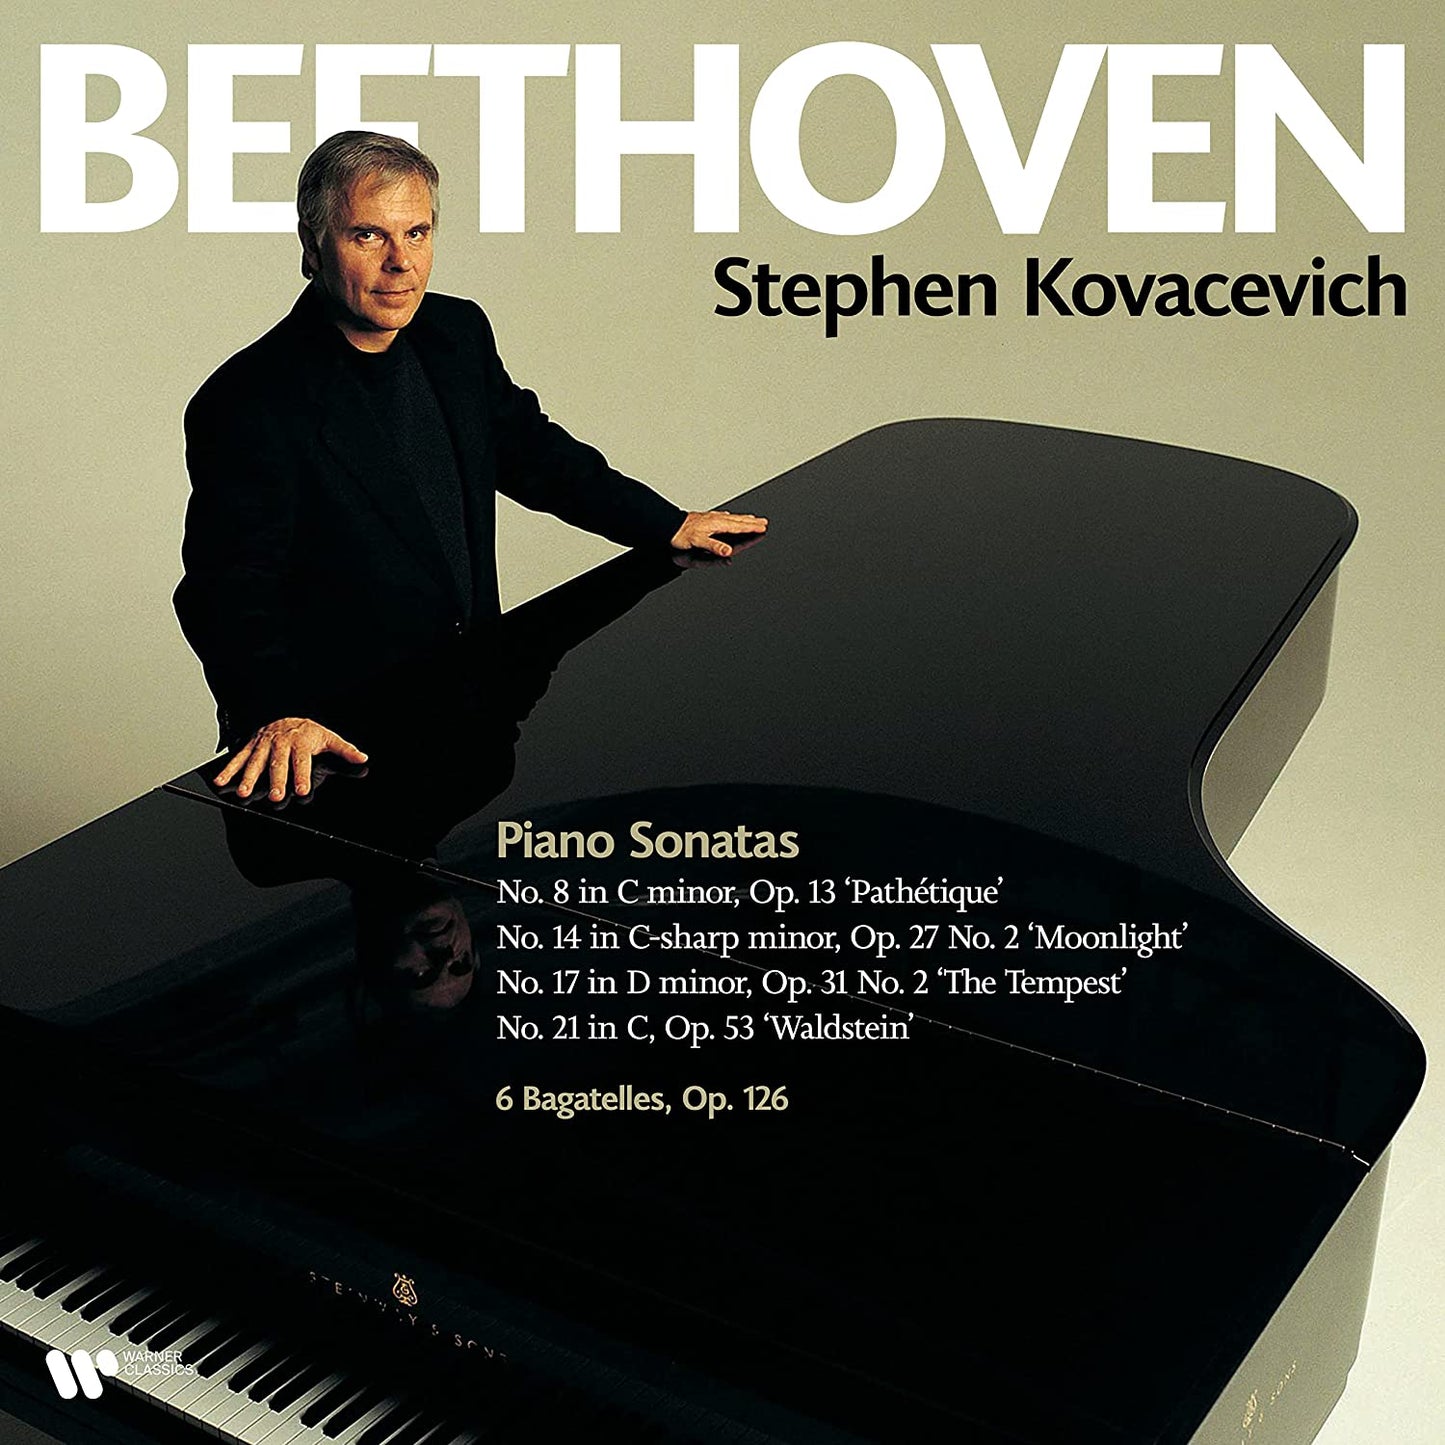 BEETHOVEN: PIANO SONATAS NOS. 8, 14, 17 & 21, and BAGATELLES - STEPHEN KOVACEVICH (2 LPs)